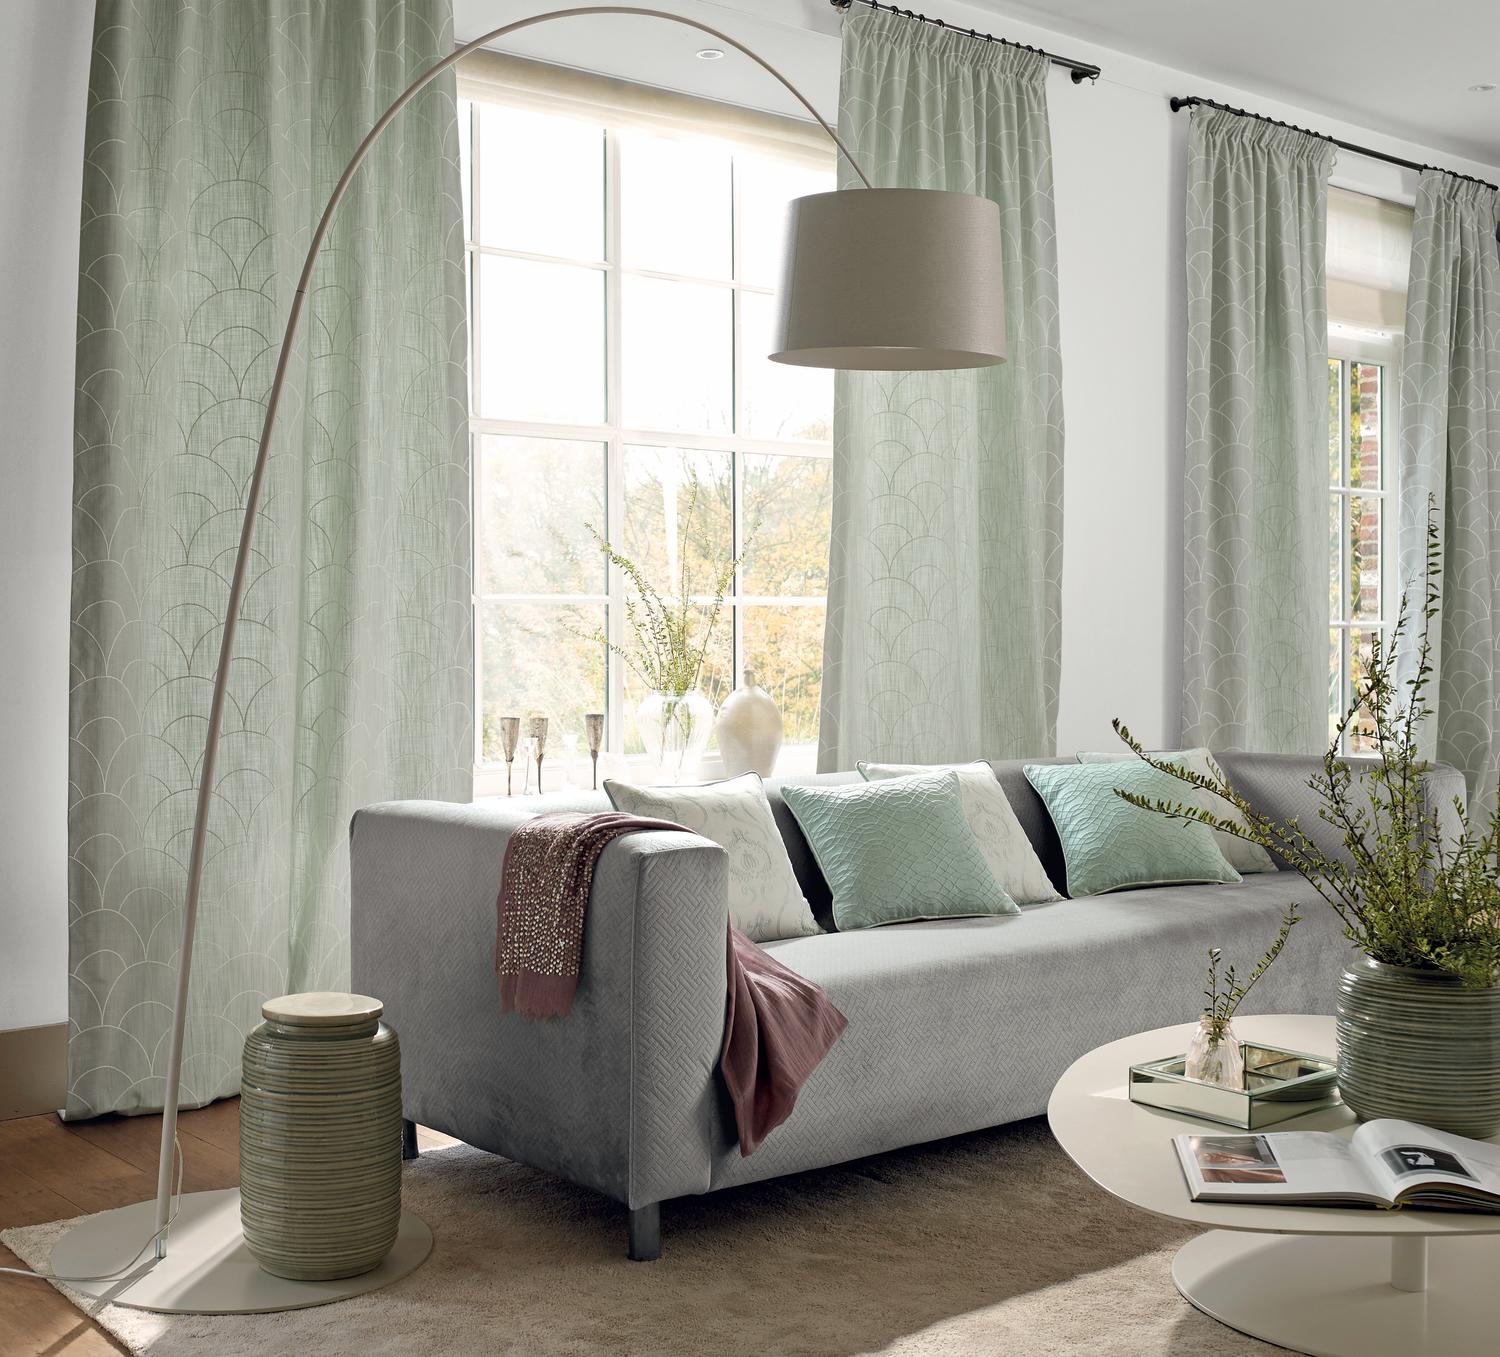 Curving floor lamp with grey lamp shade